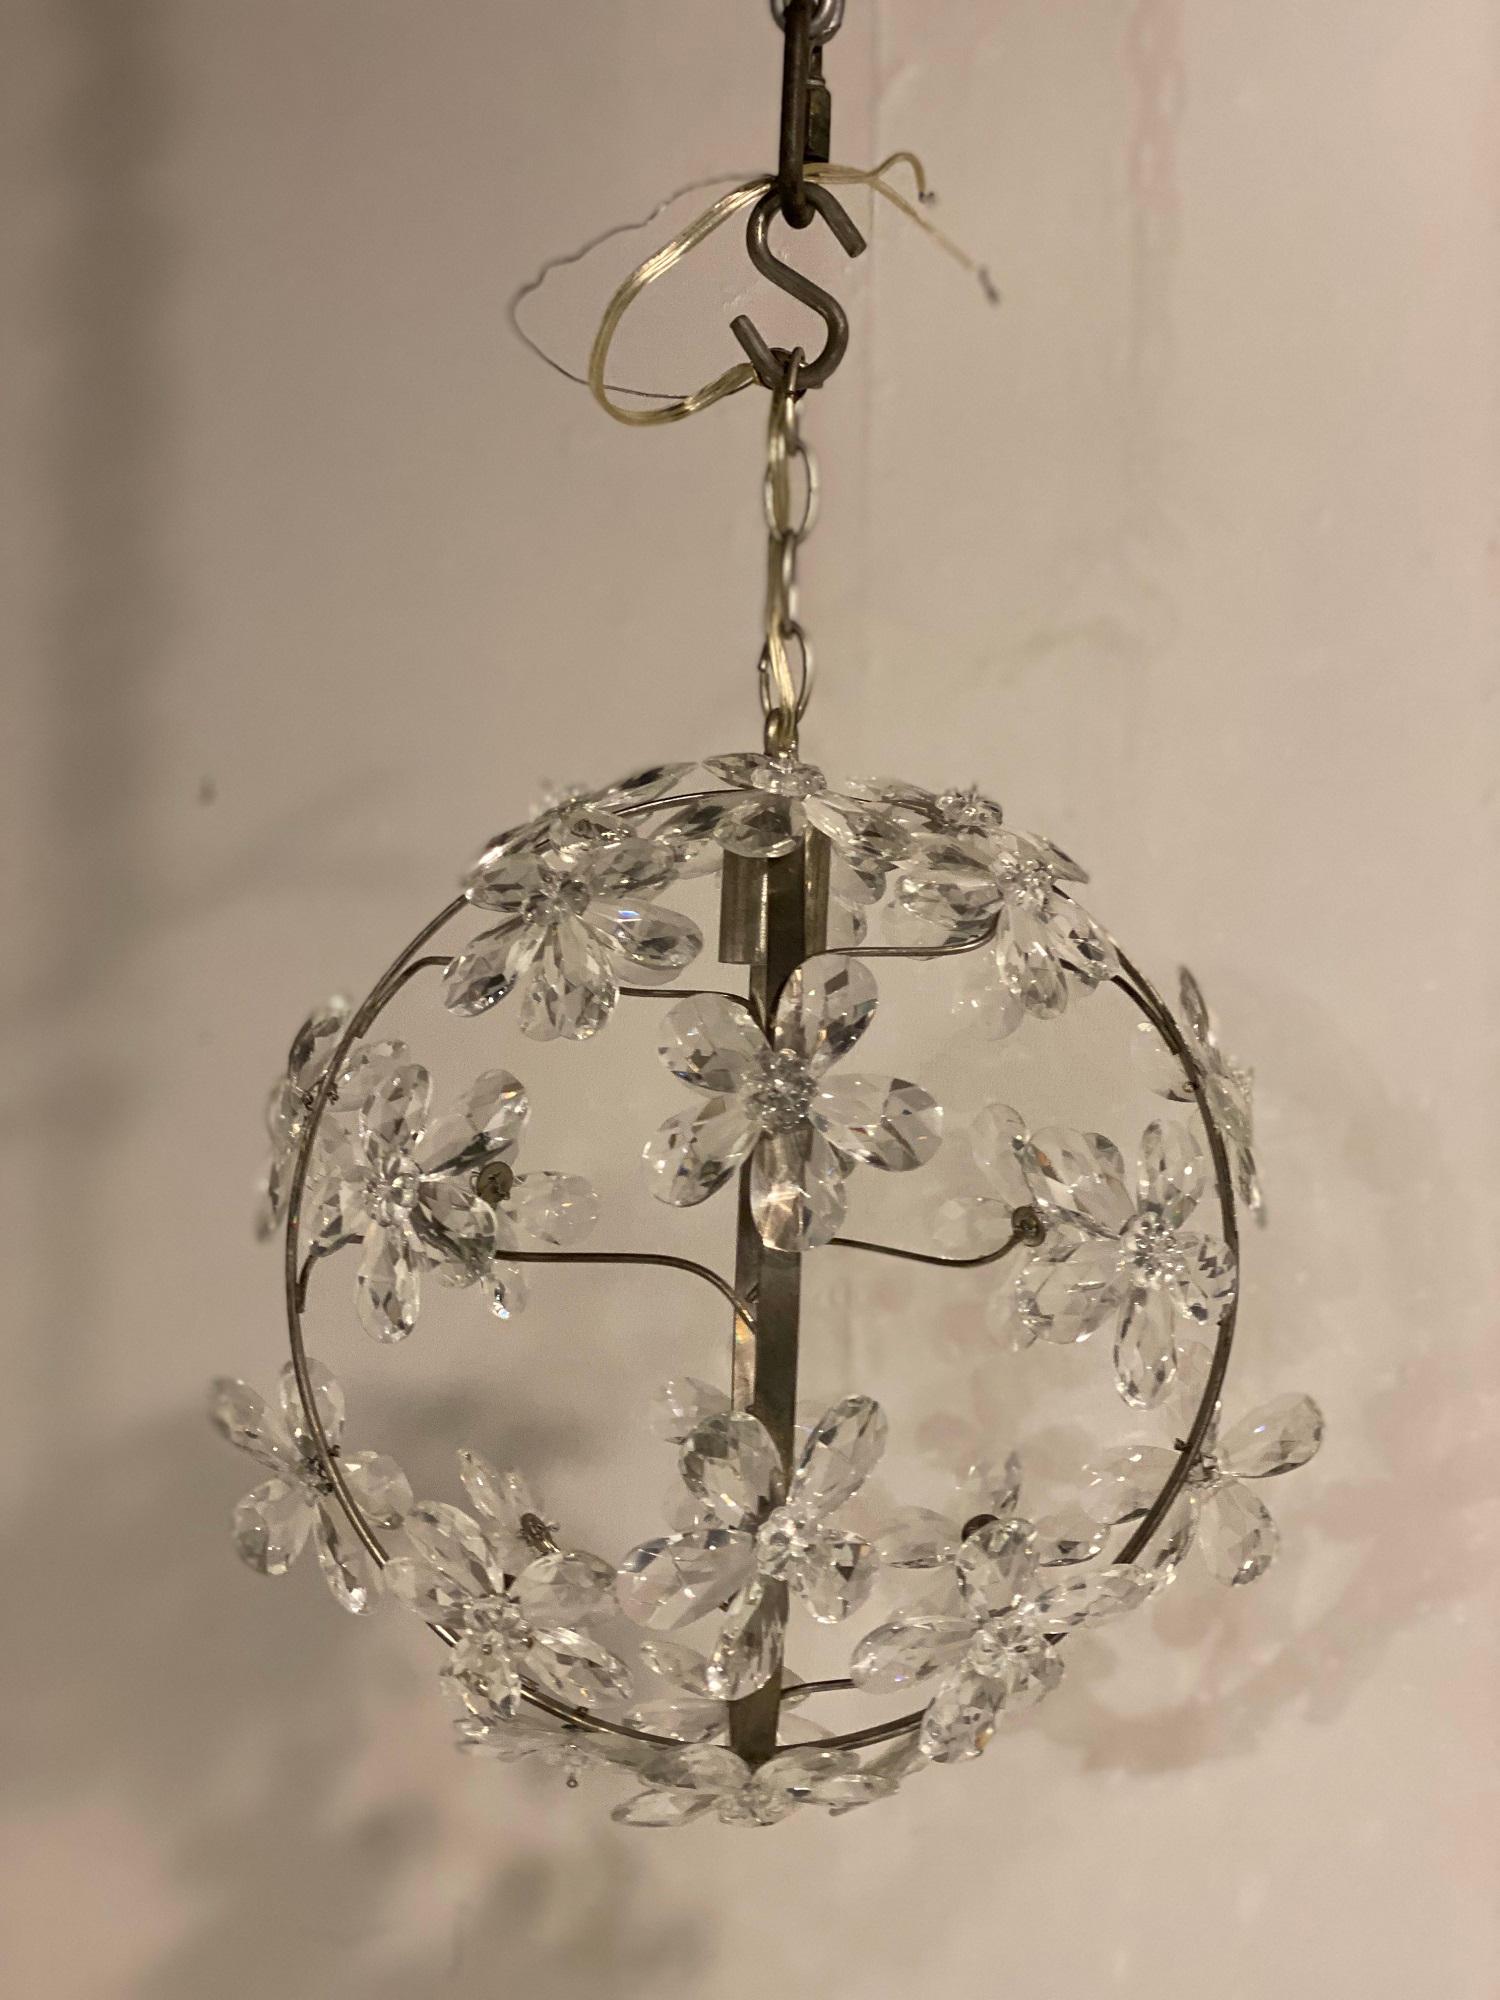 French Provincial 1930s French Small Crystal Flower Light Fixture For Sale